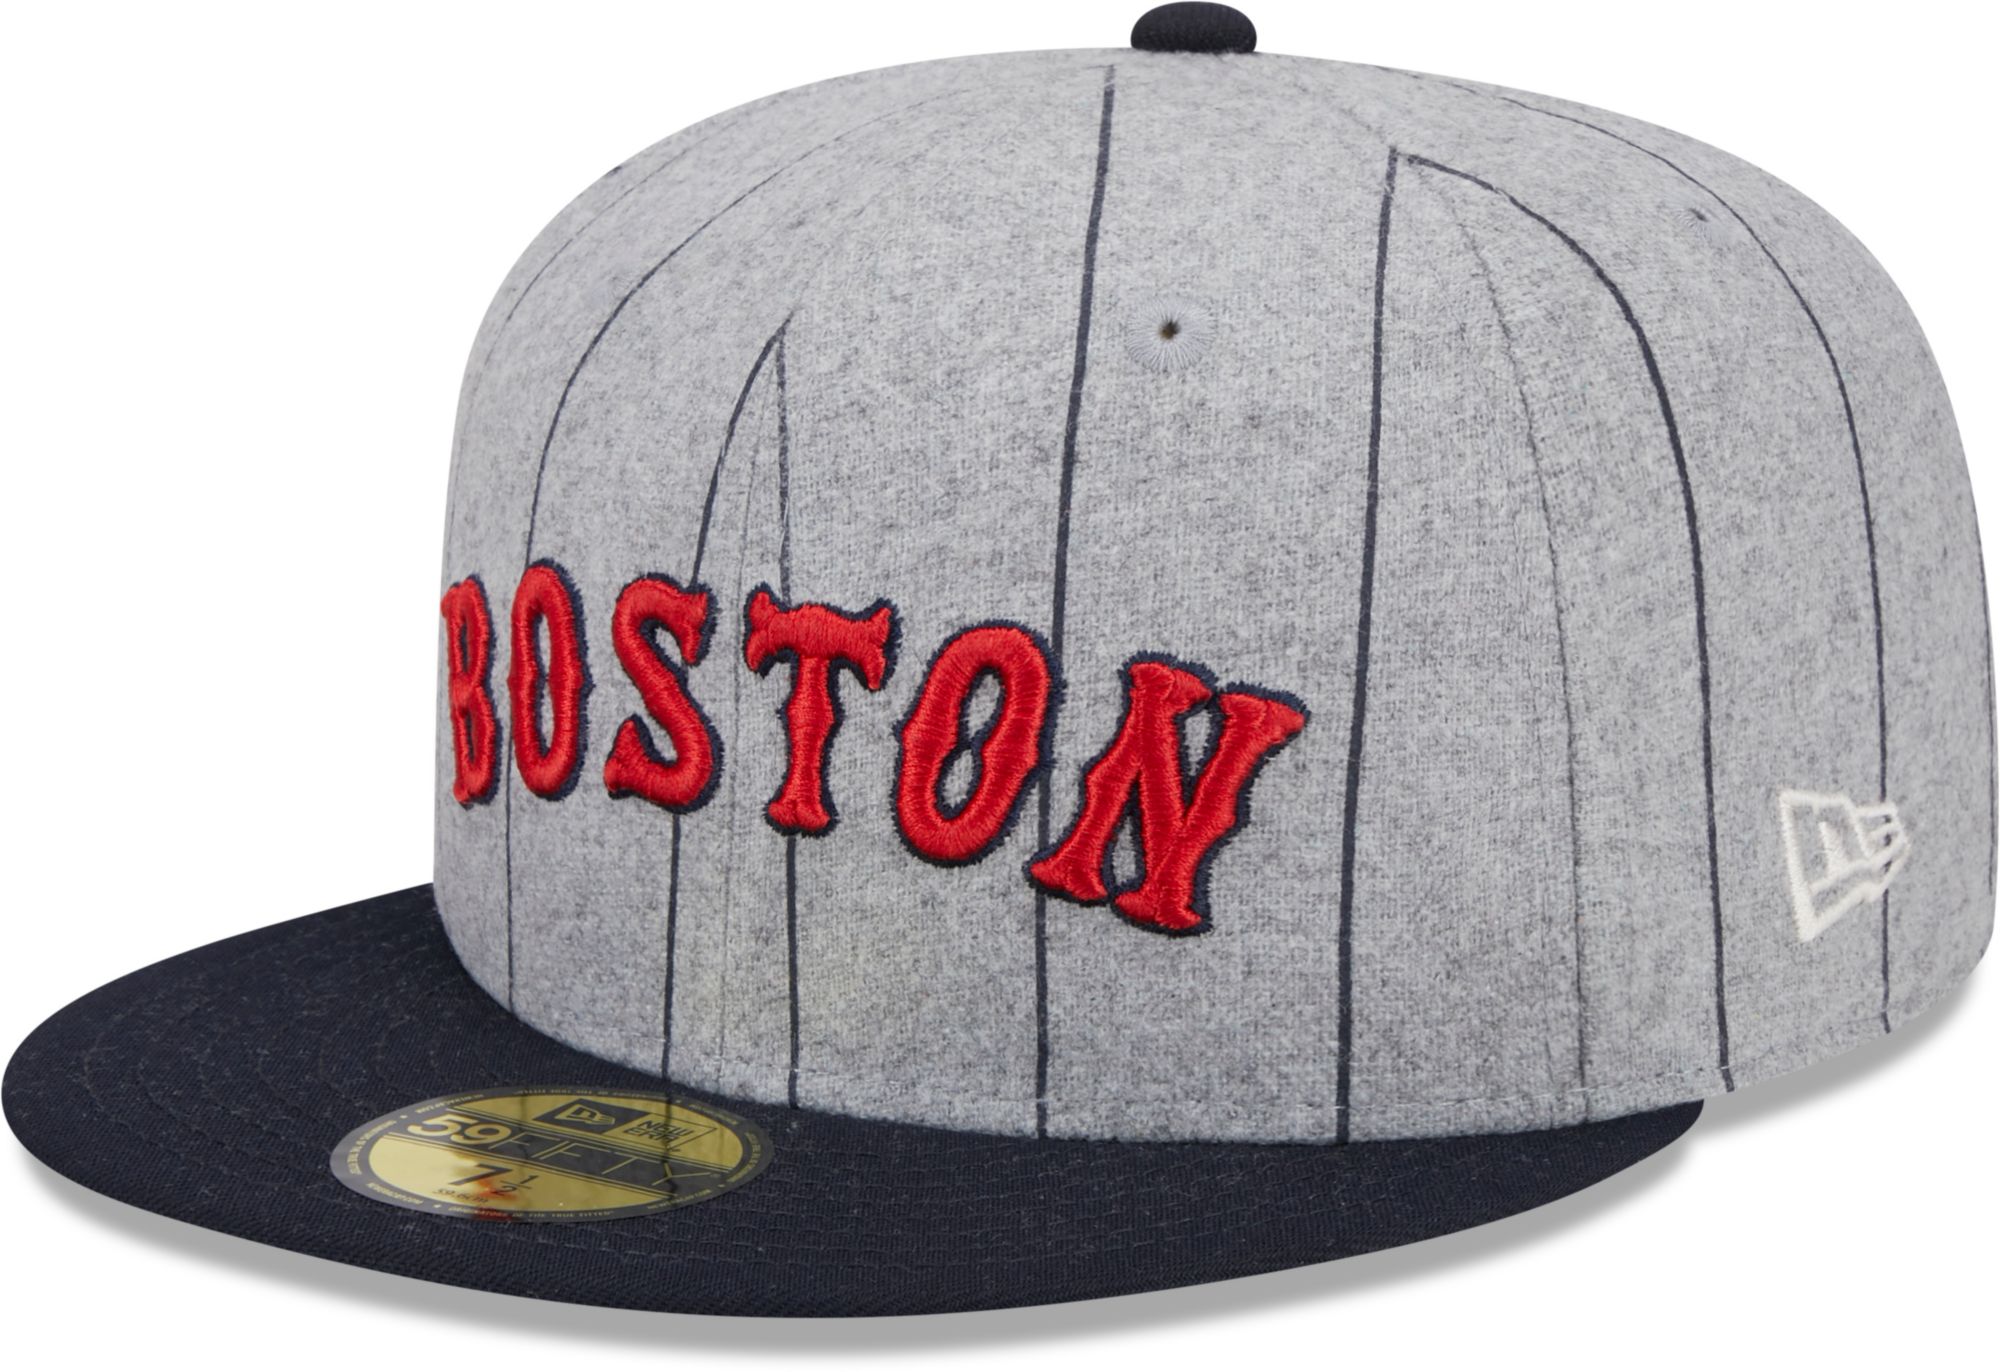 New Era Men's Boston Red Sox Navy Heather Pinstripe 59Fifty Fitted Hat